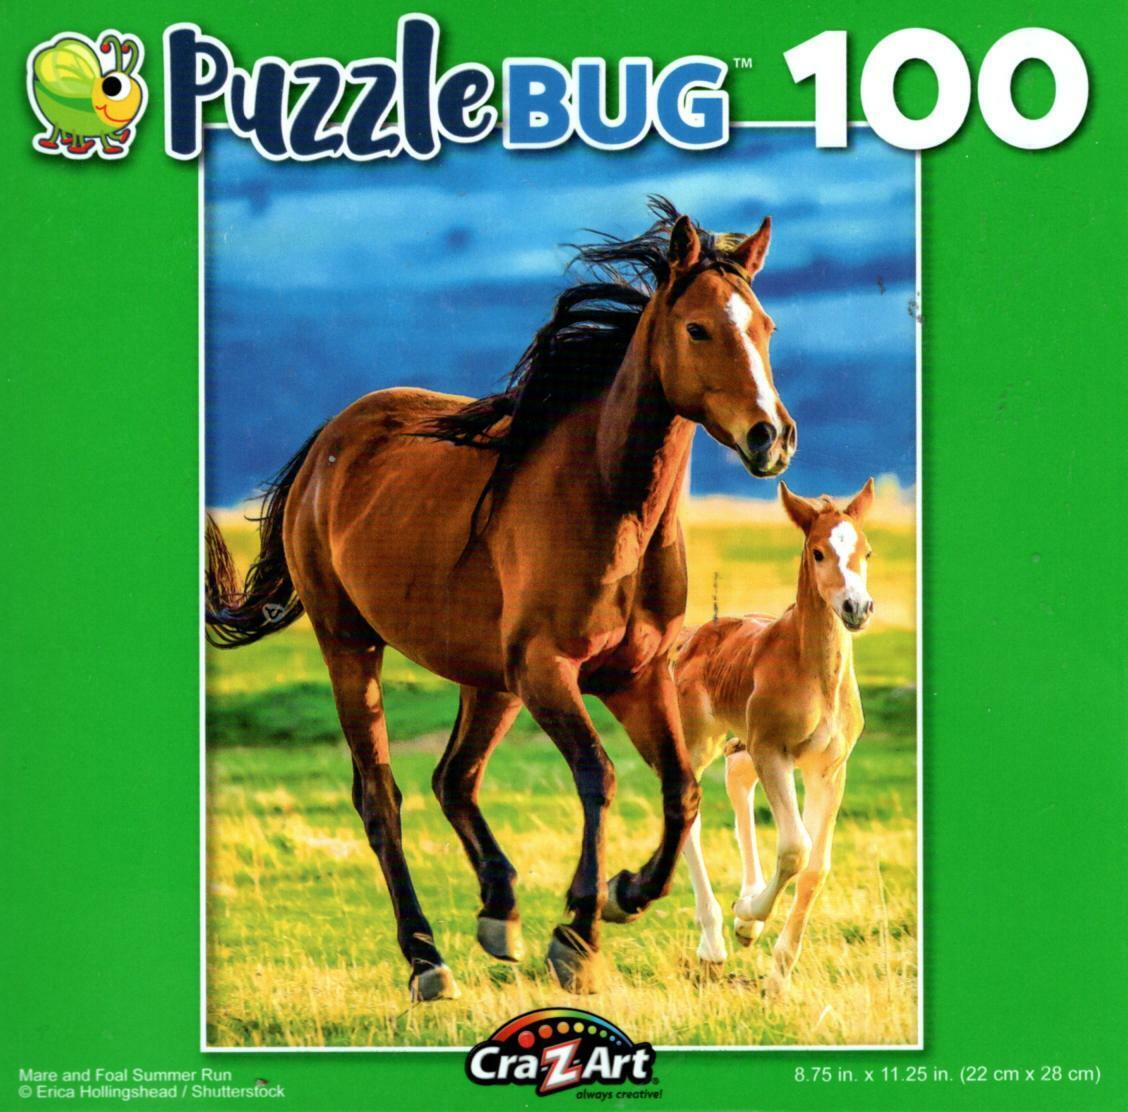 Puzzlebug Mare and Foal Summer Run - 100 Pieces Jigsaw Puzzle